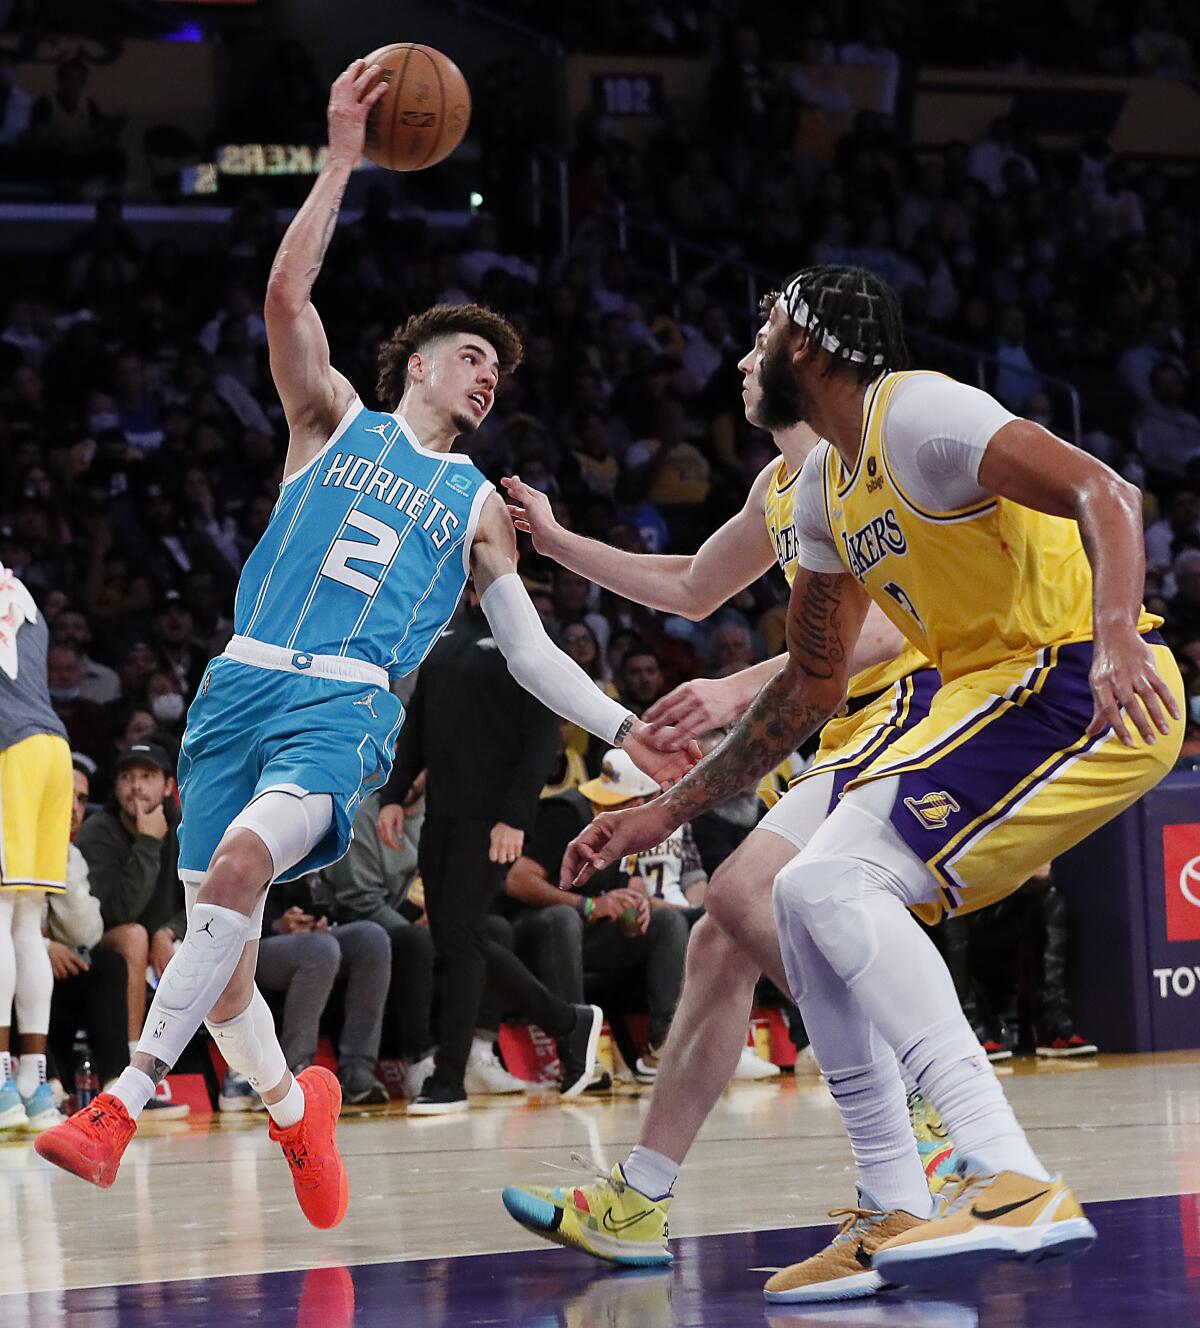 harlotte Hornets guard LaMelo Ball twists his body to pass over Lakers guard Austin Reaves and forward Anthony Davis.